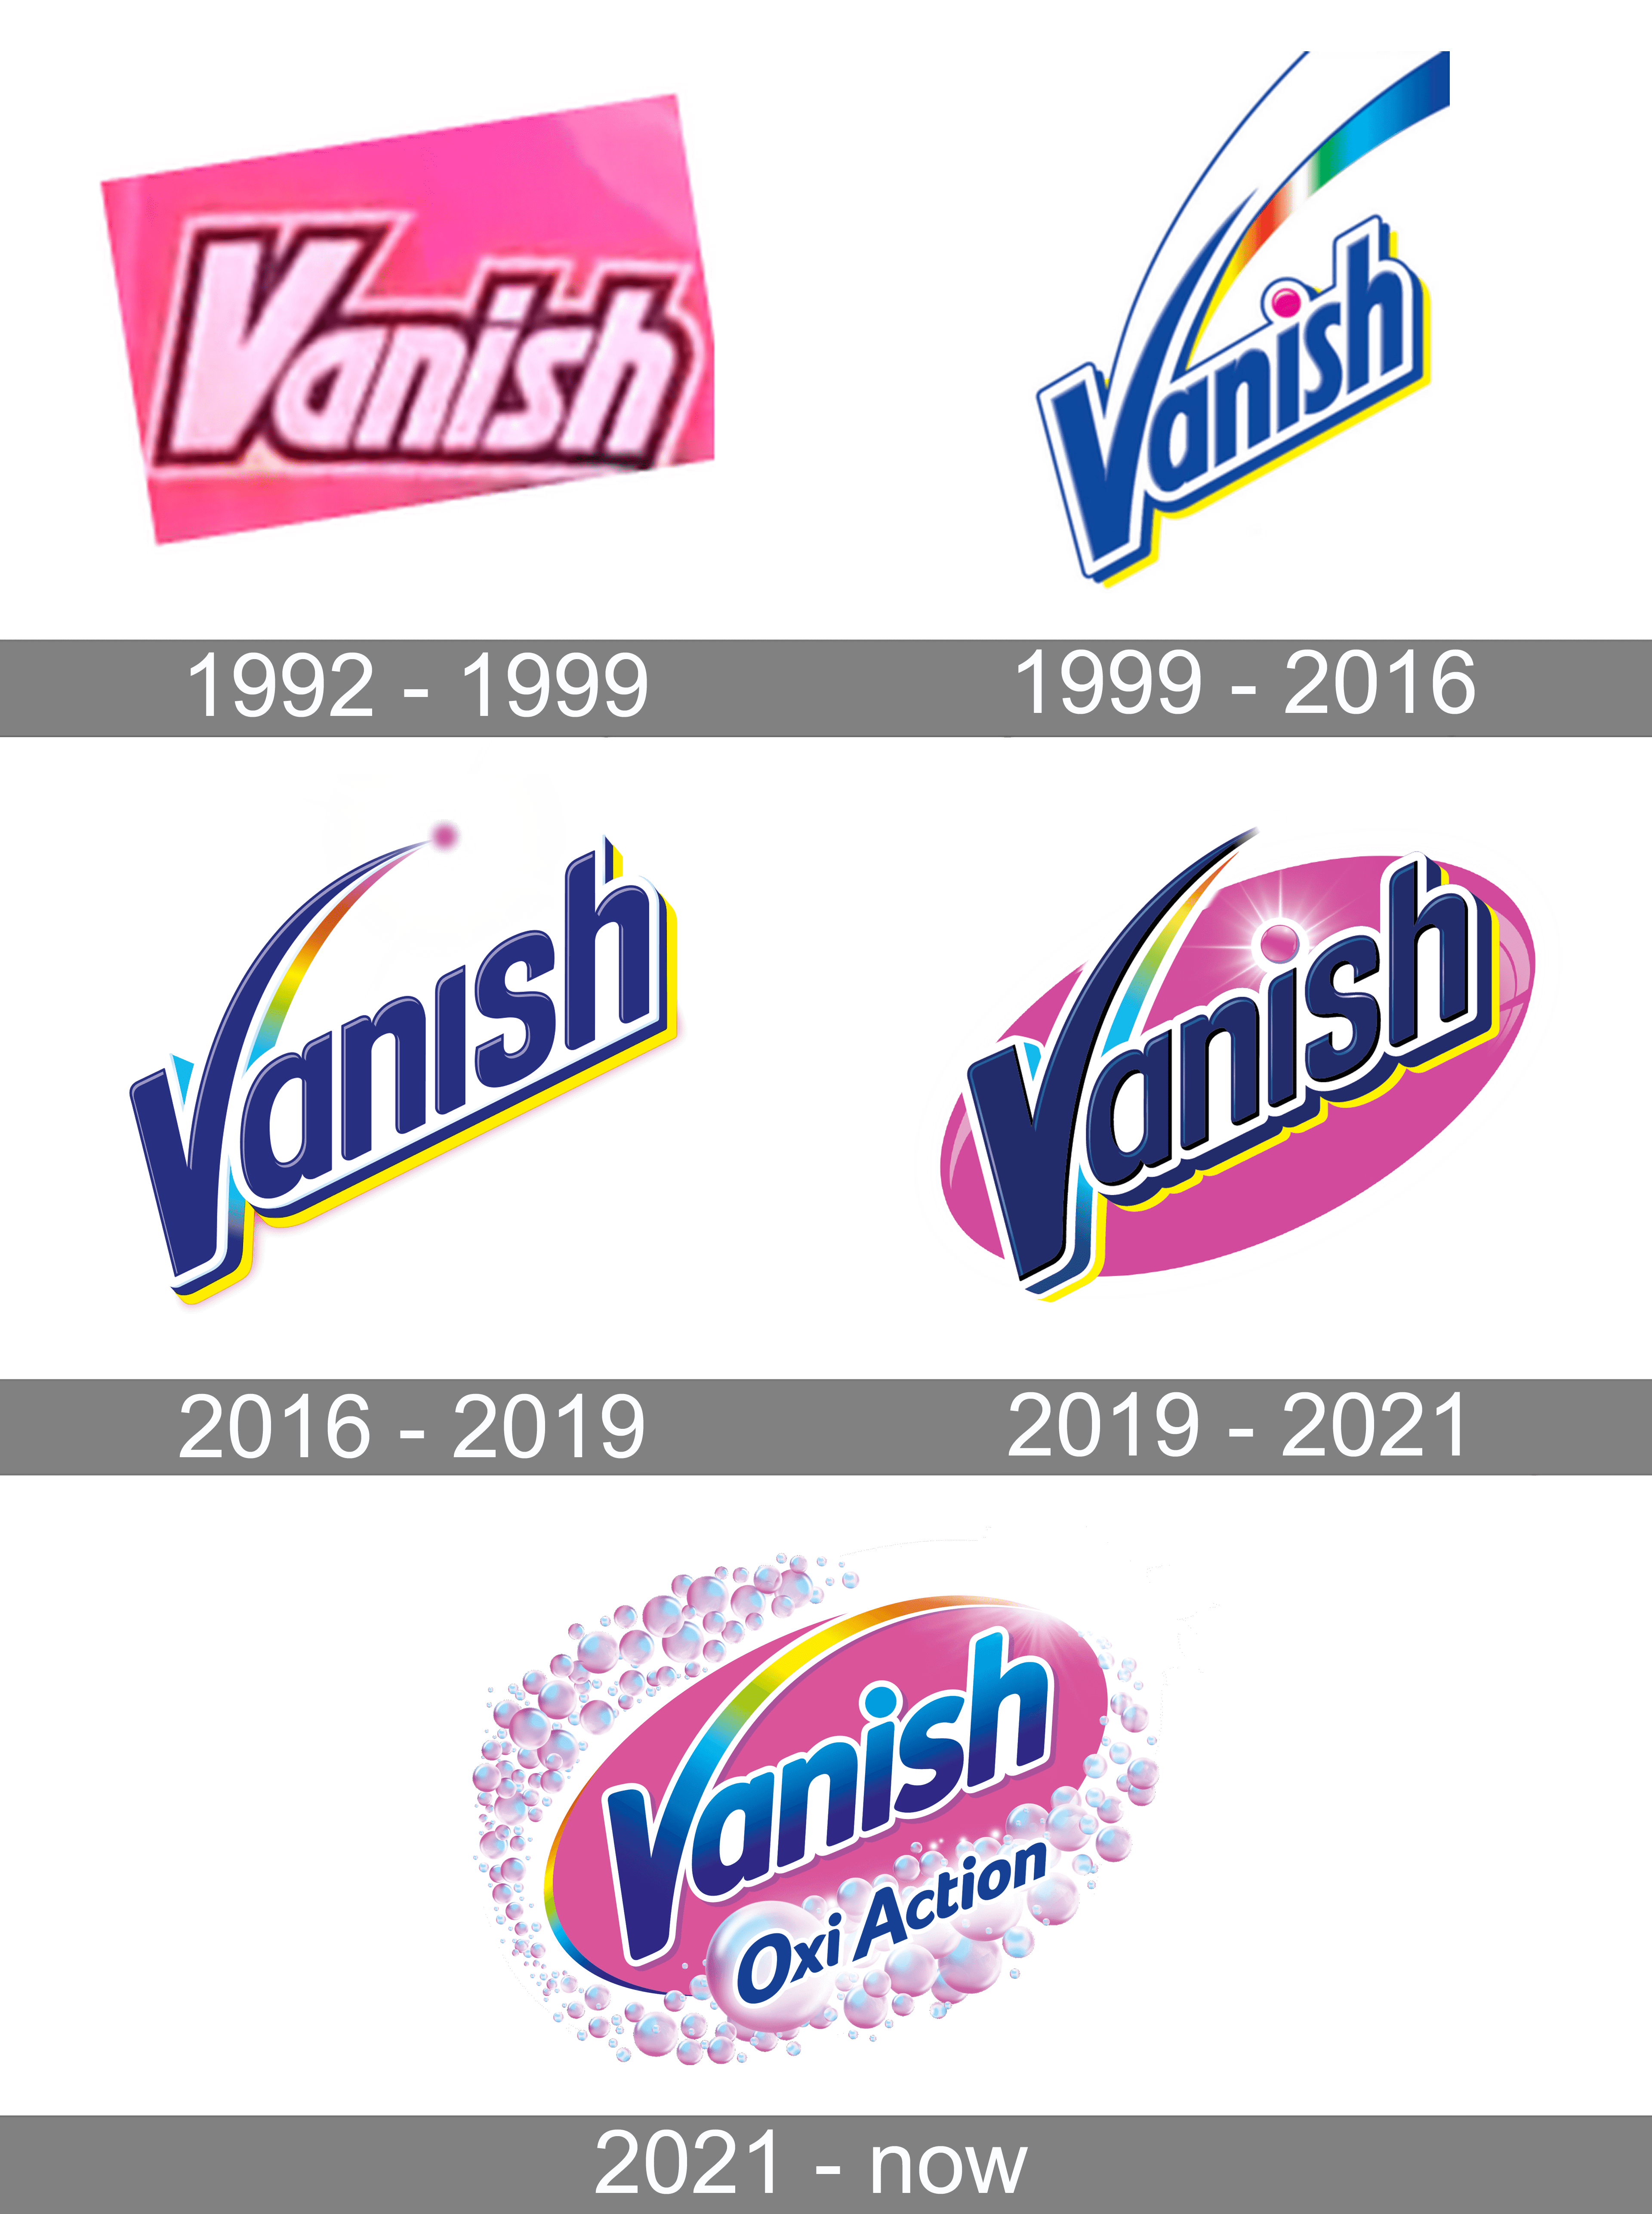 up and vanish meaning